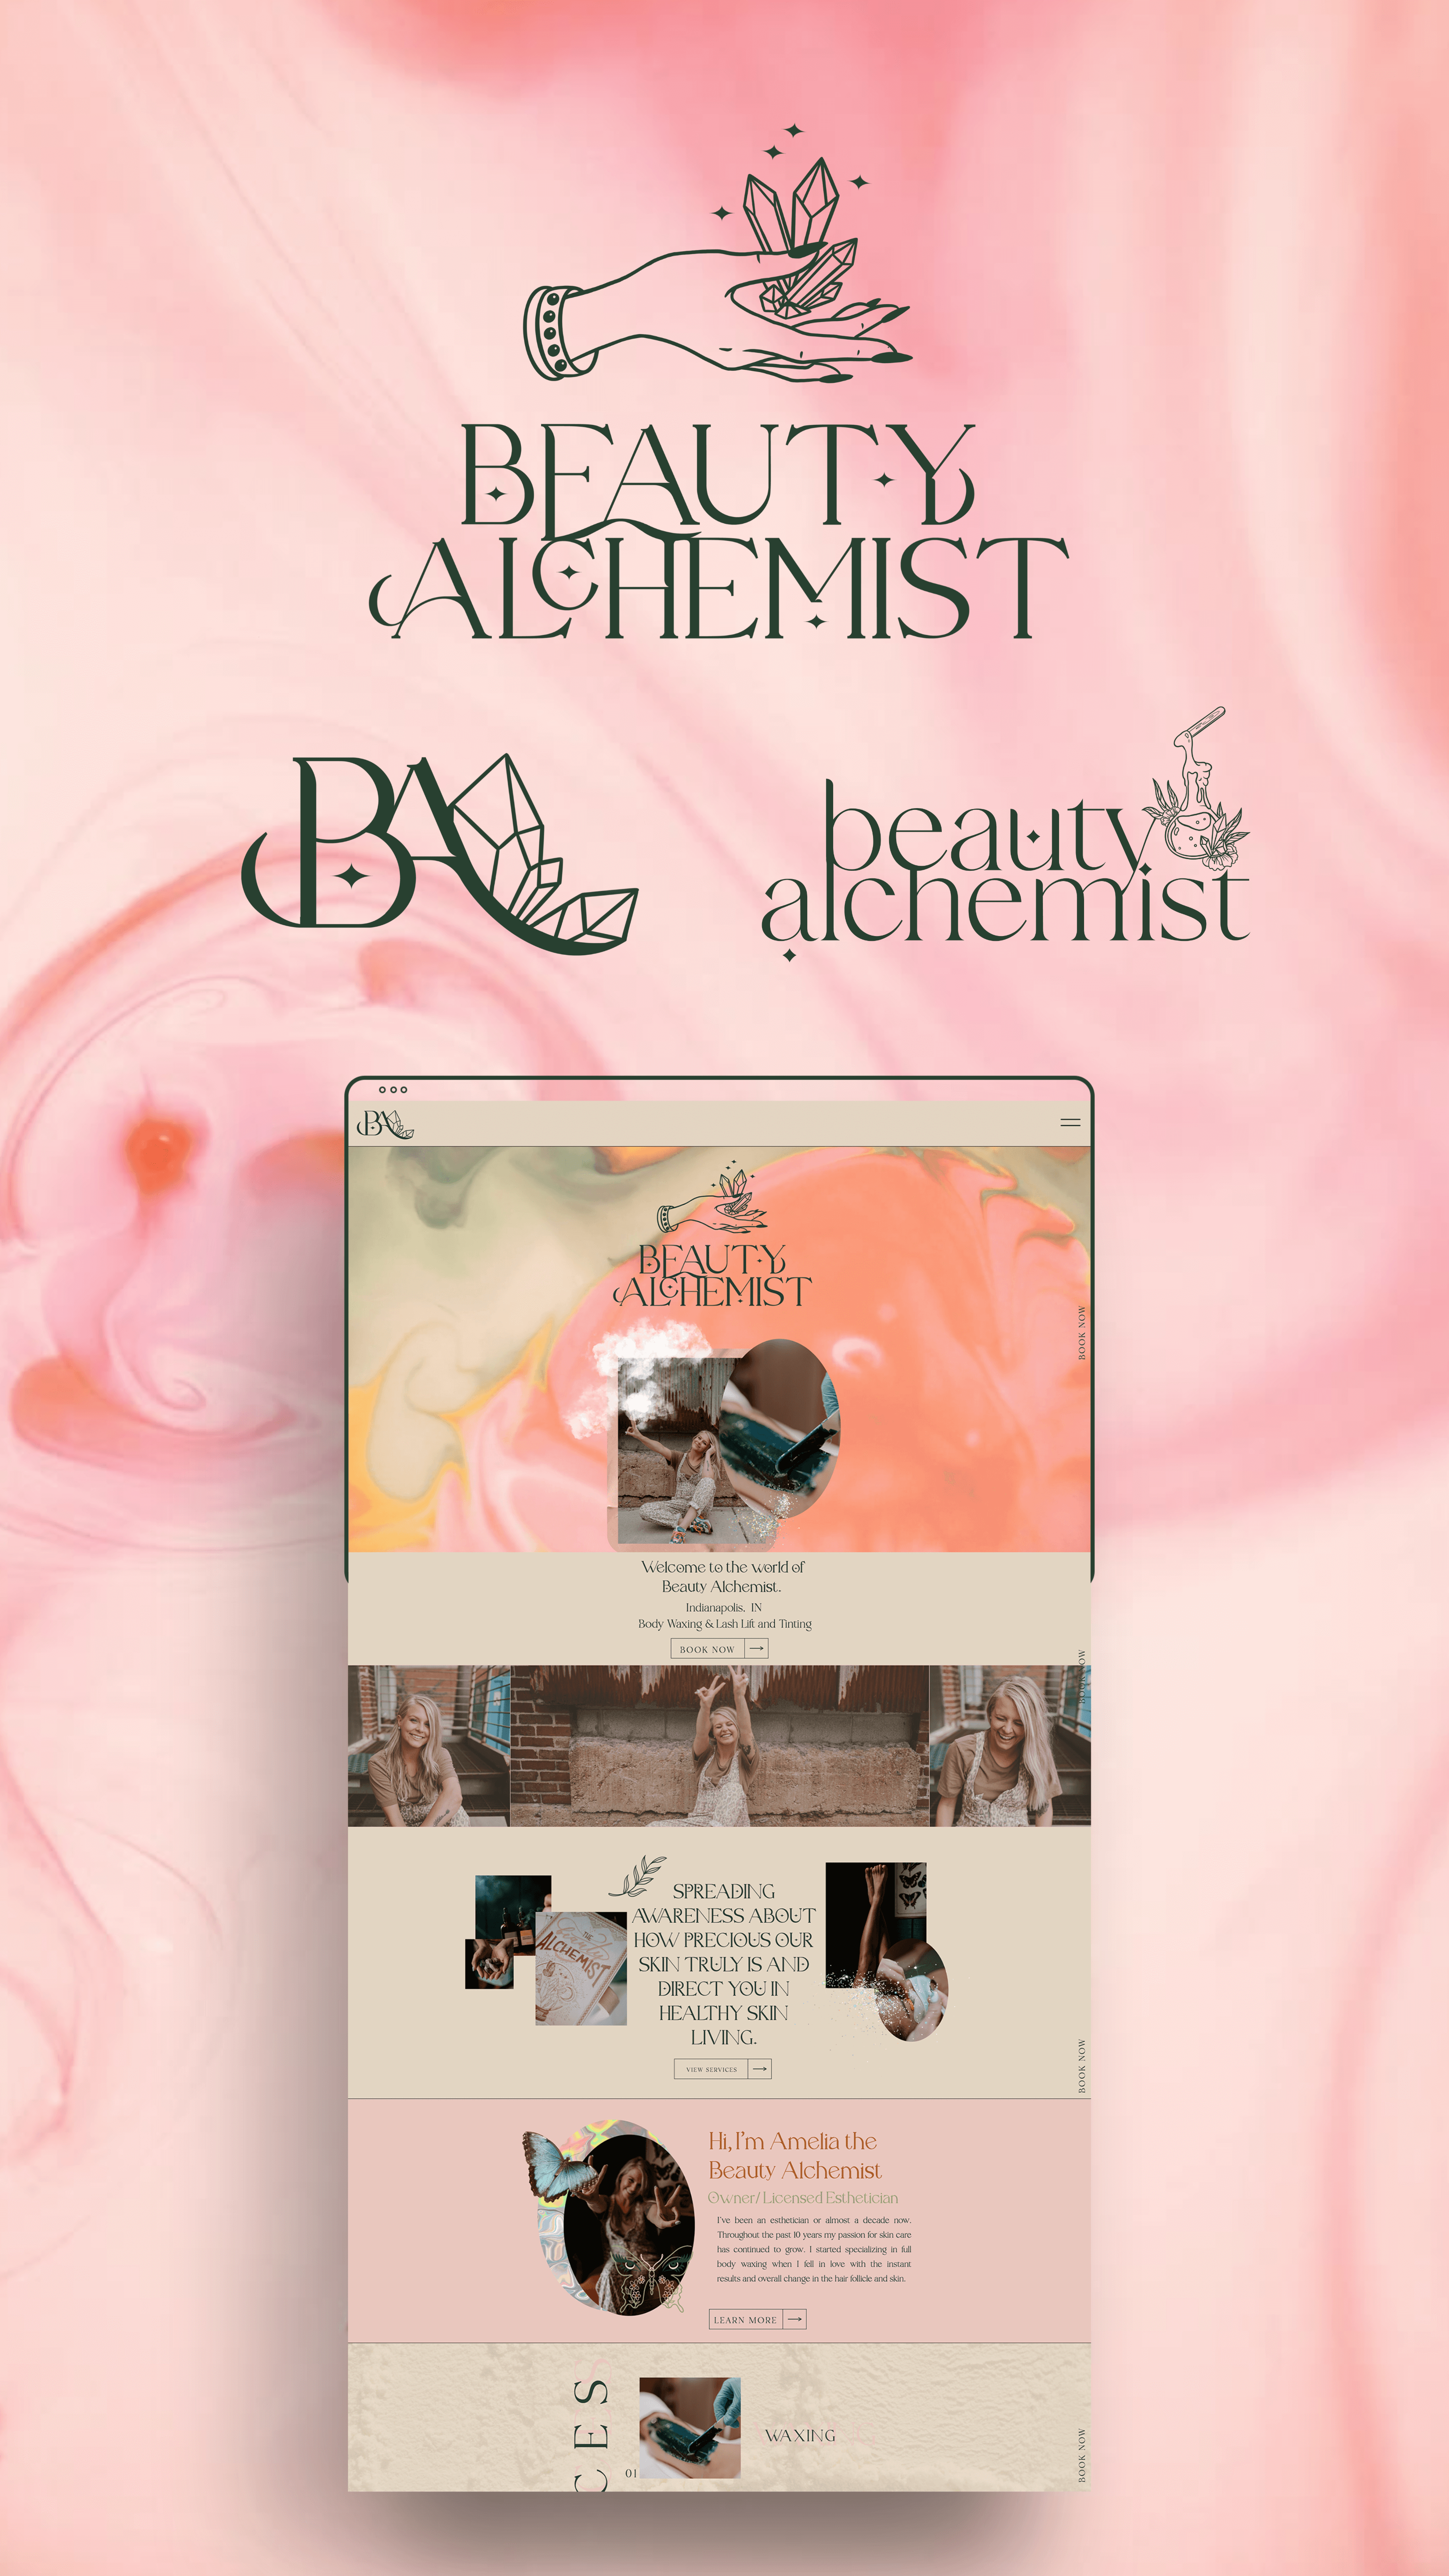 Logo and web design inspired by alchemy for a mystical esthetician brand and web design by House of W, a brand and web designer for photographers and creatives.